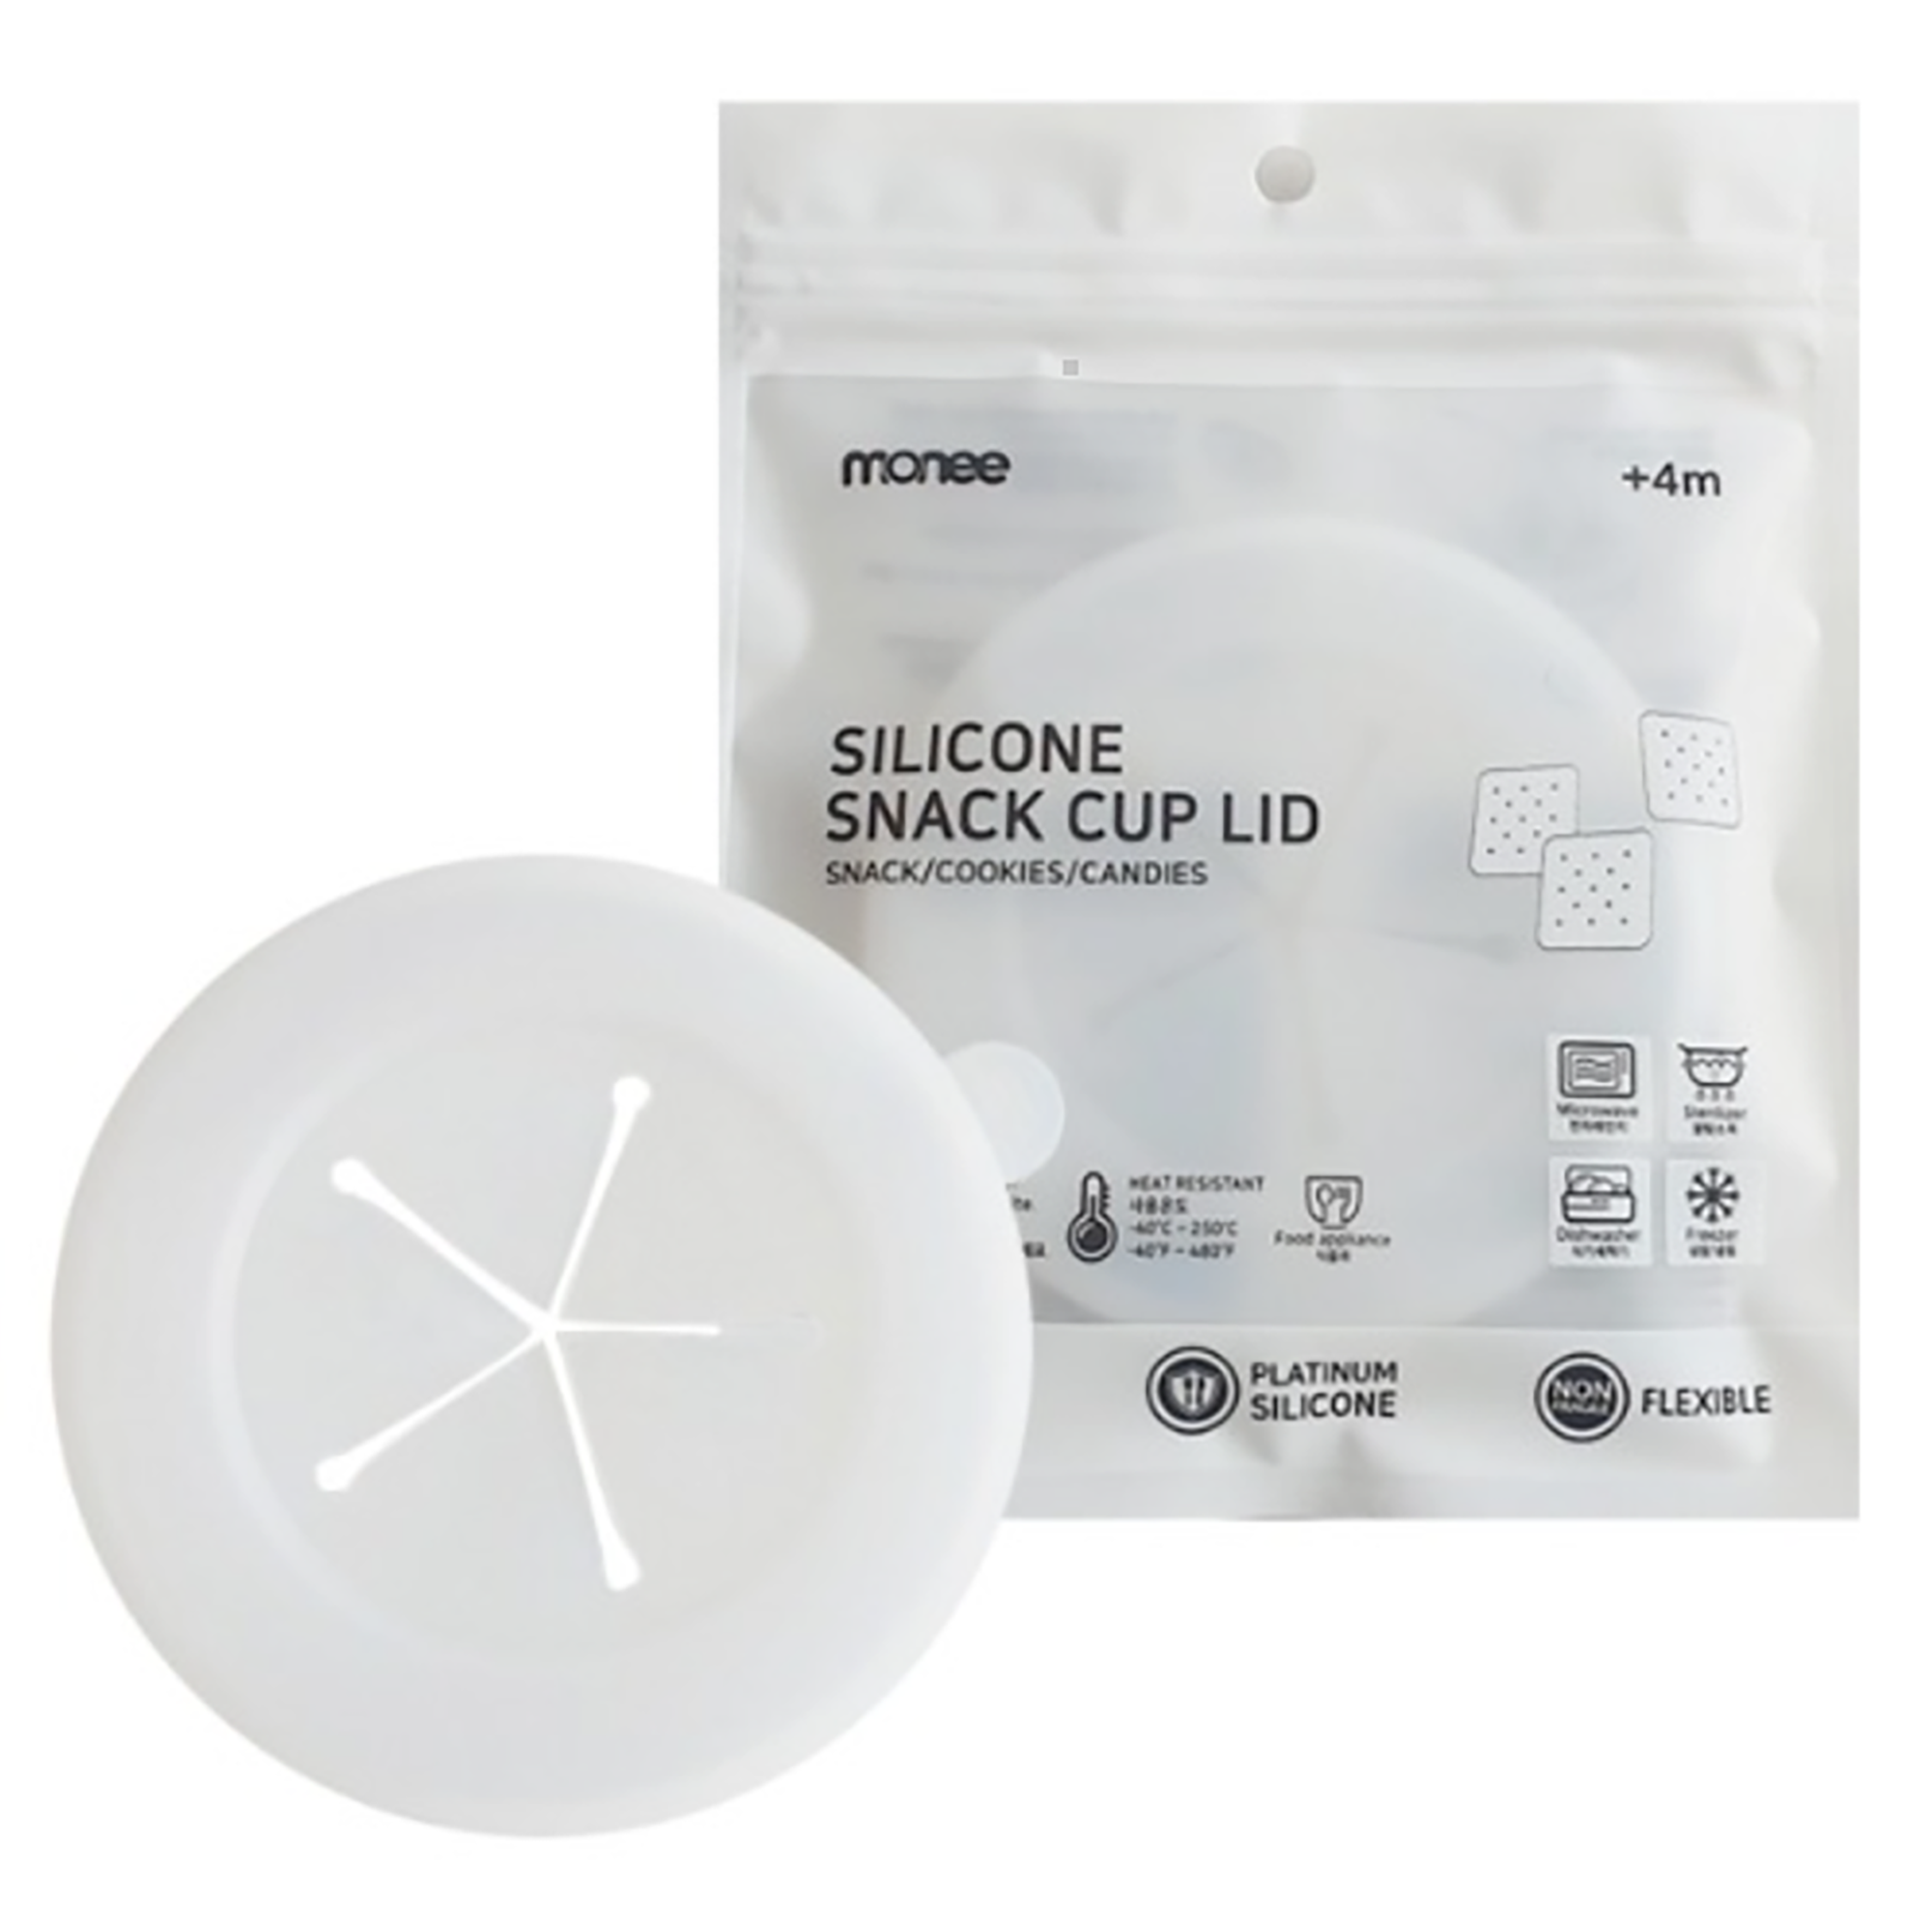 Silicone Snack Cup Lid